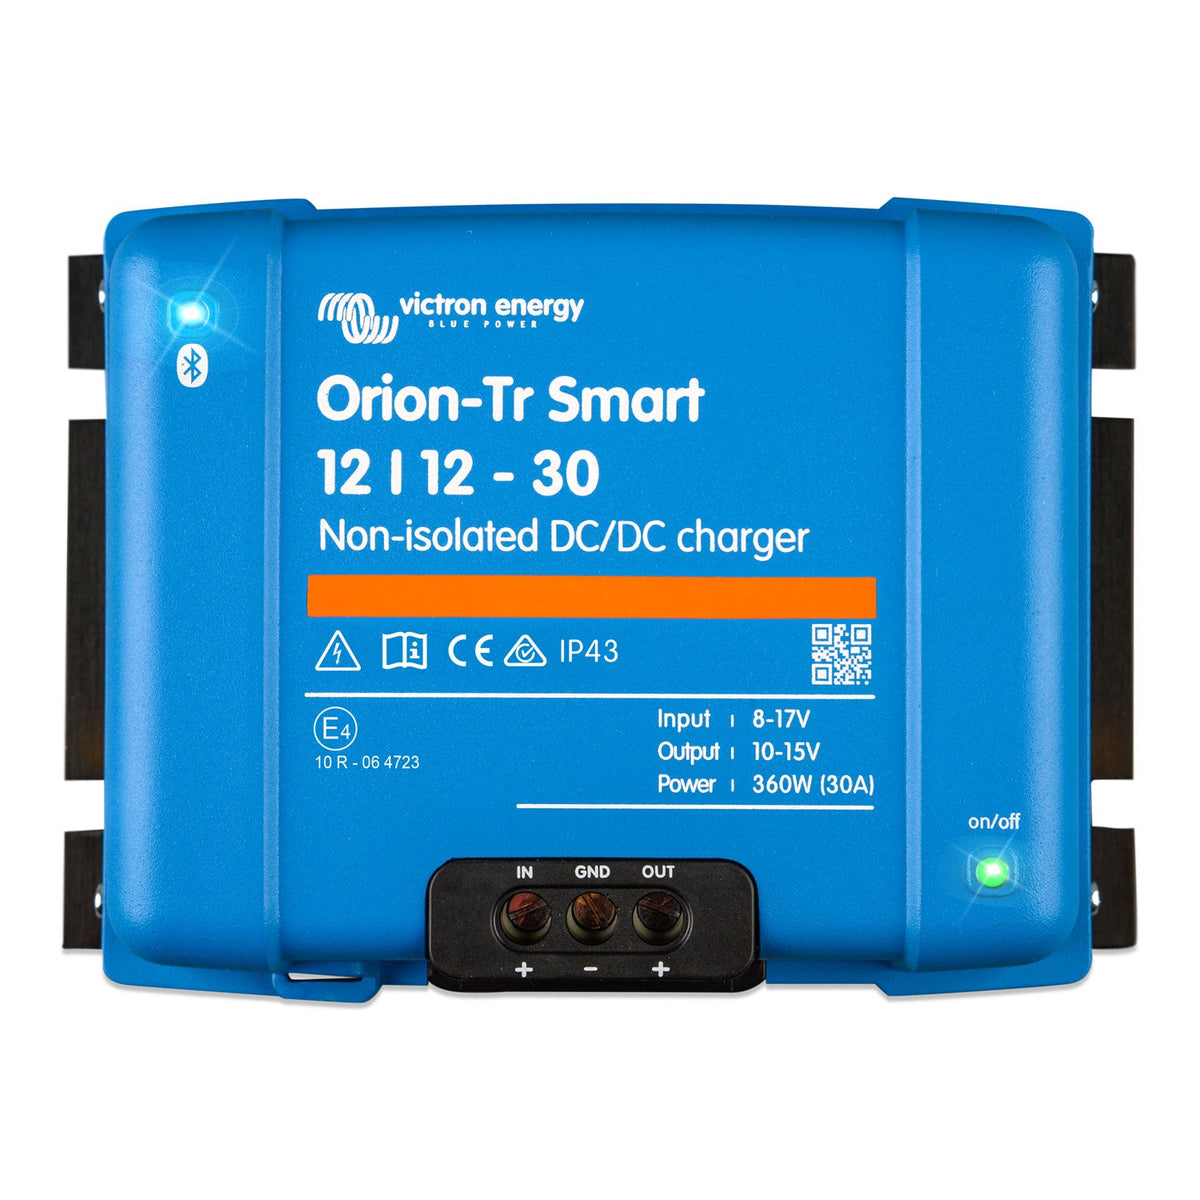 Victron Orion-Tr Smart 12/12-30A (360W) Non-isolated DC-DC charger - ORI121236140